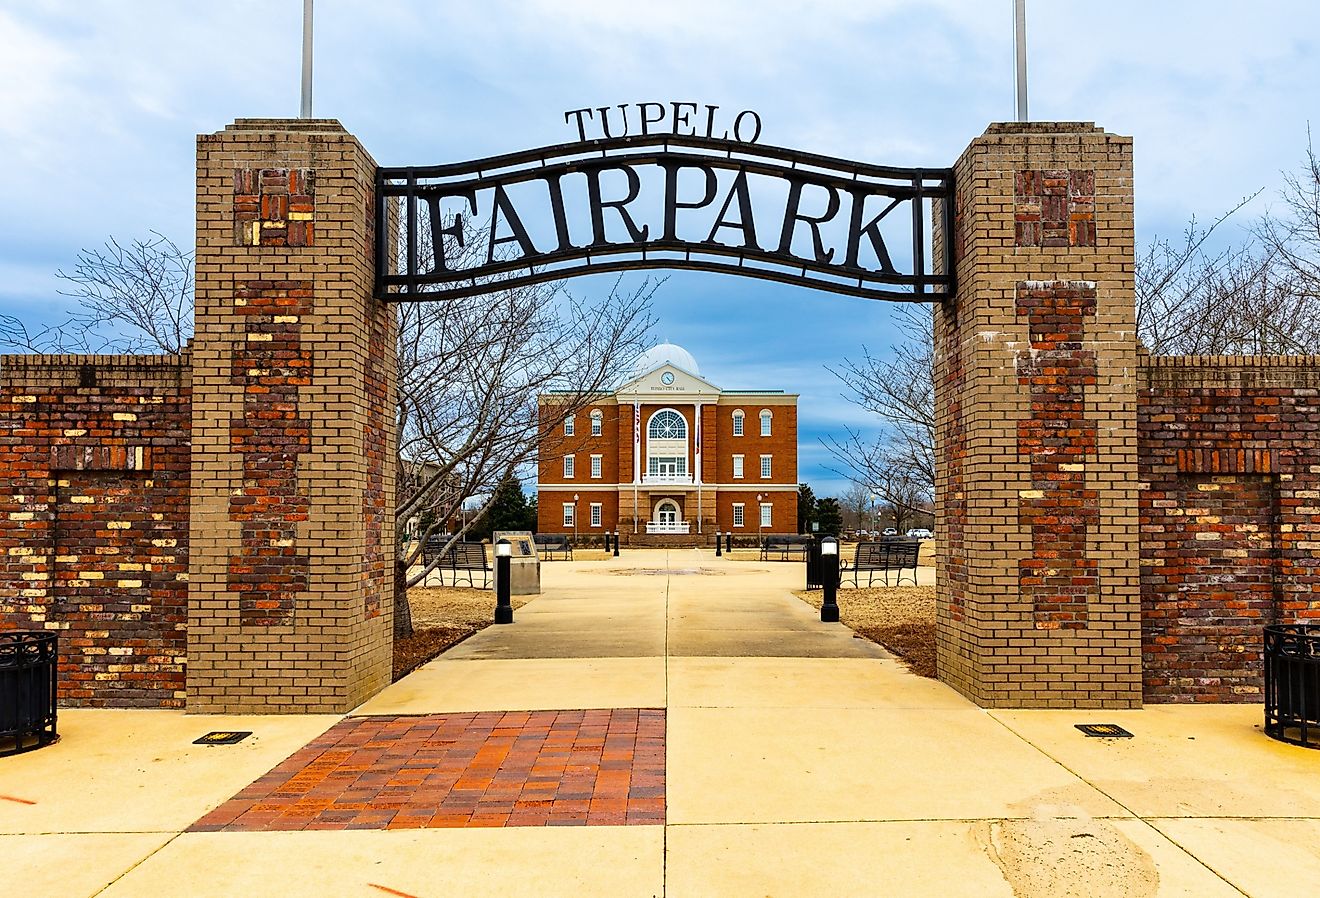 Fair Park in front of Tupelo City Hall in Tupelo, Mississippi. Image credit Chad Robertson Media via Shutterstock.